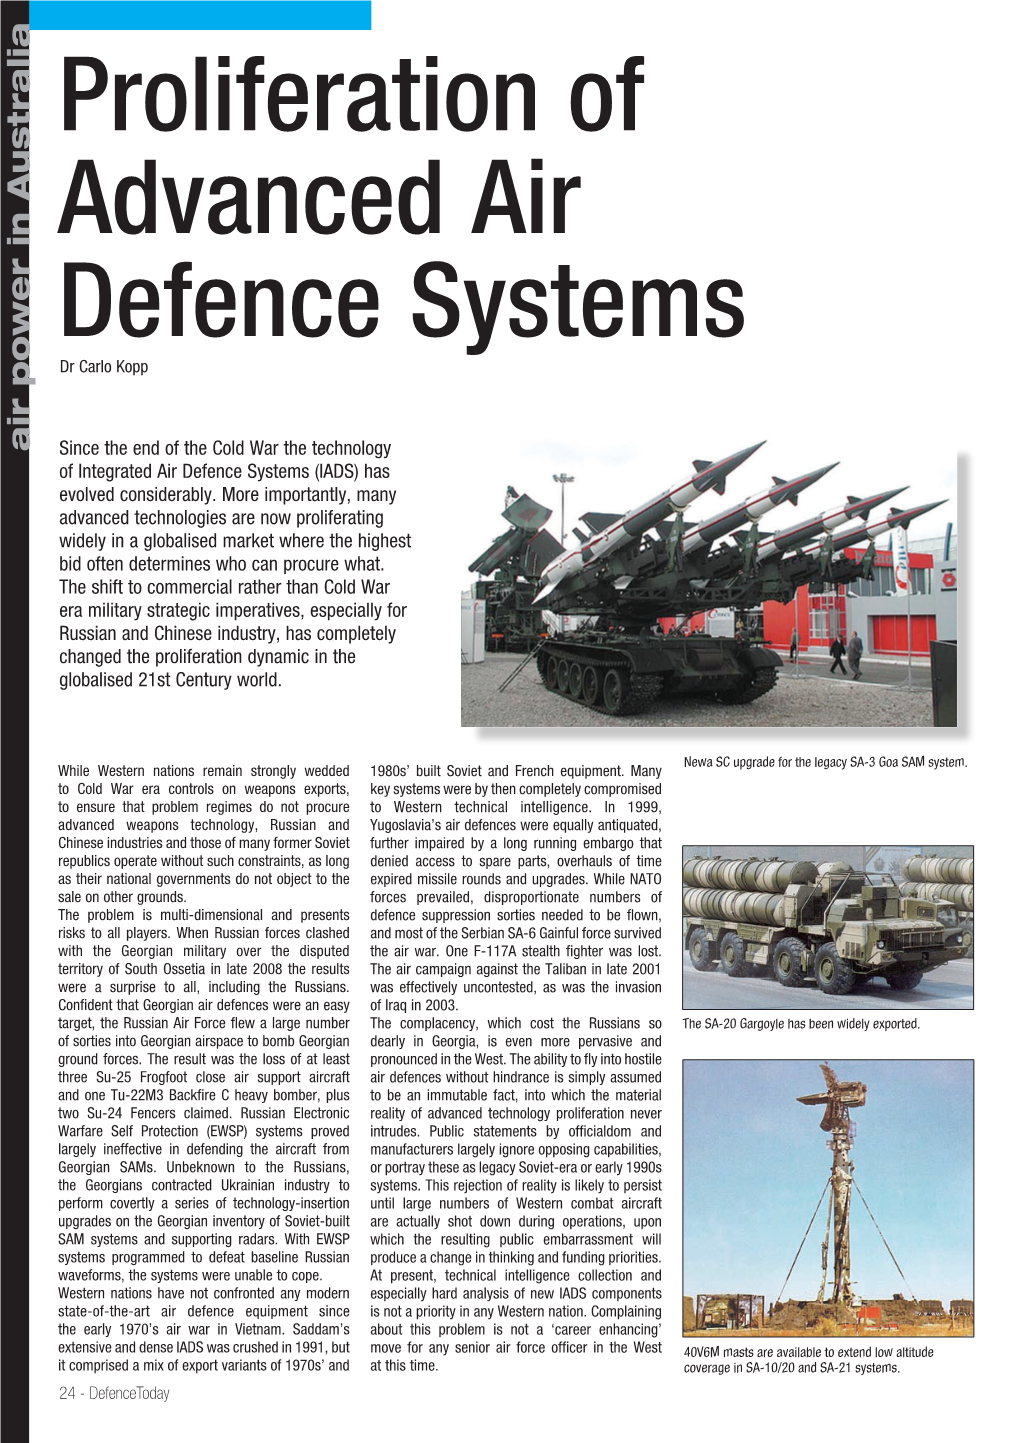 Proliferation of Advanced Air Defence Systems Dr Carlo Kopp